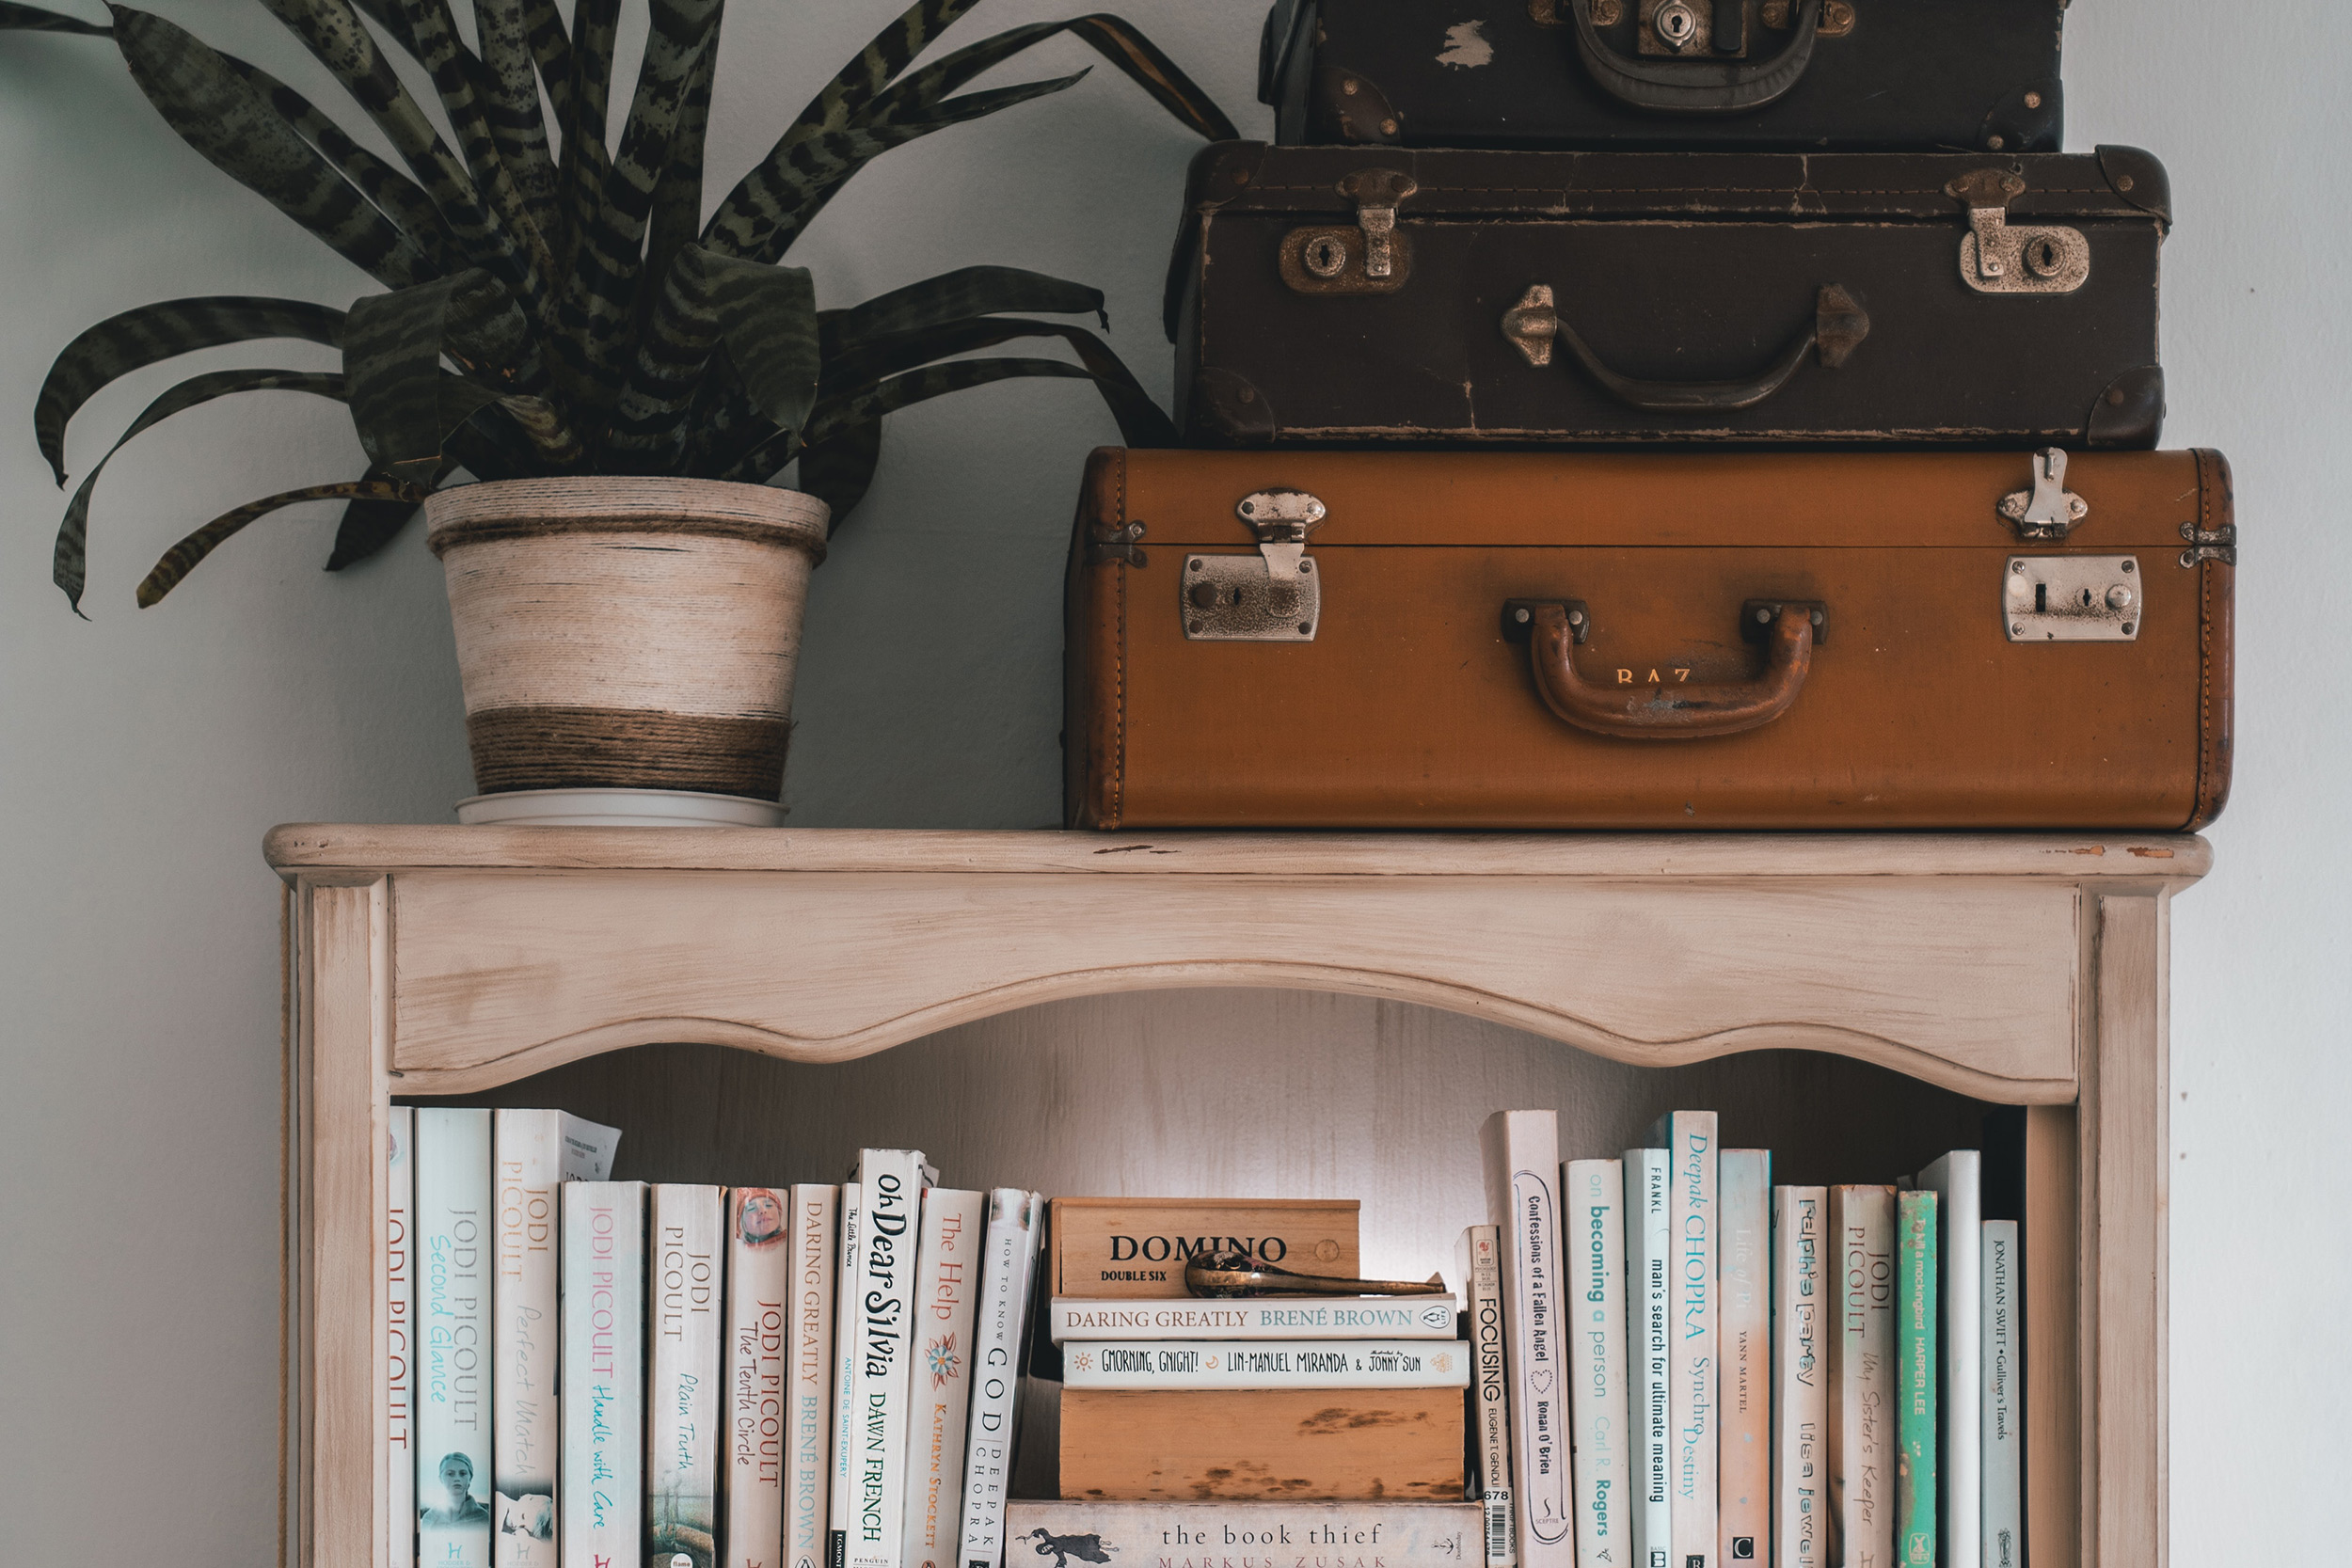 plant and small suitcases or briefcases on top of a bookshelf full of books